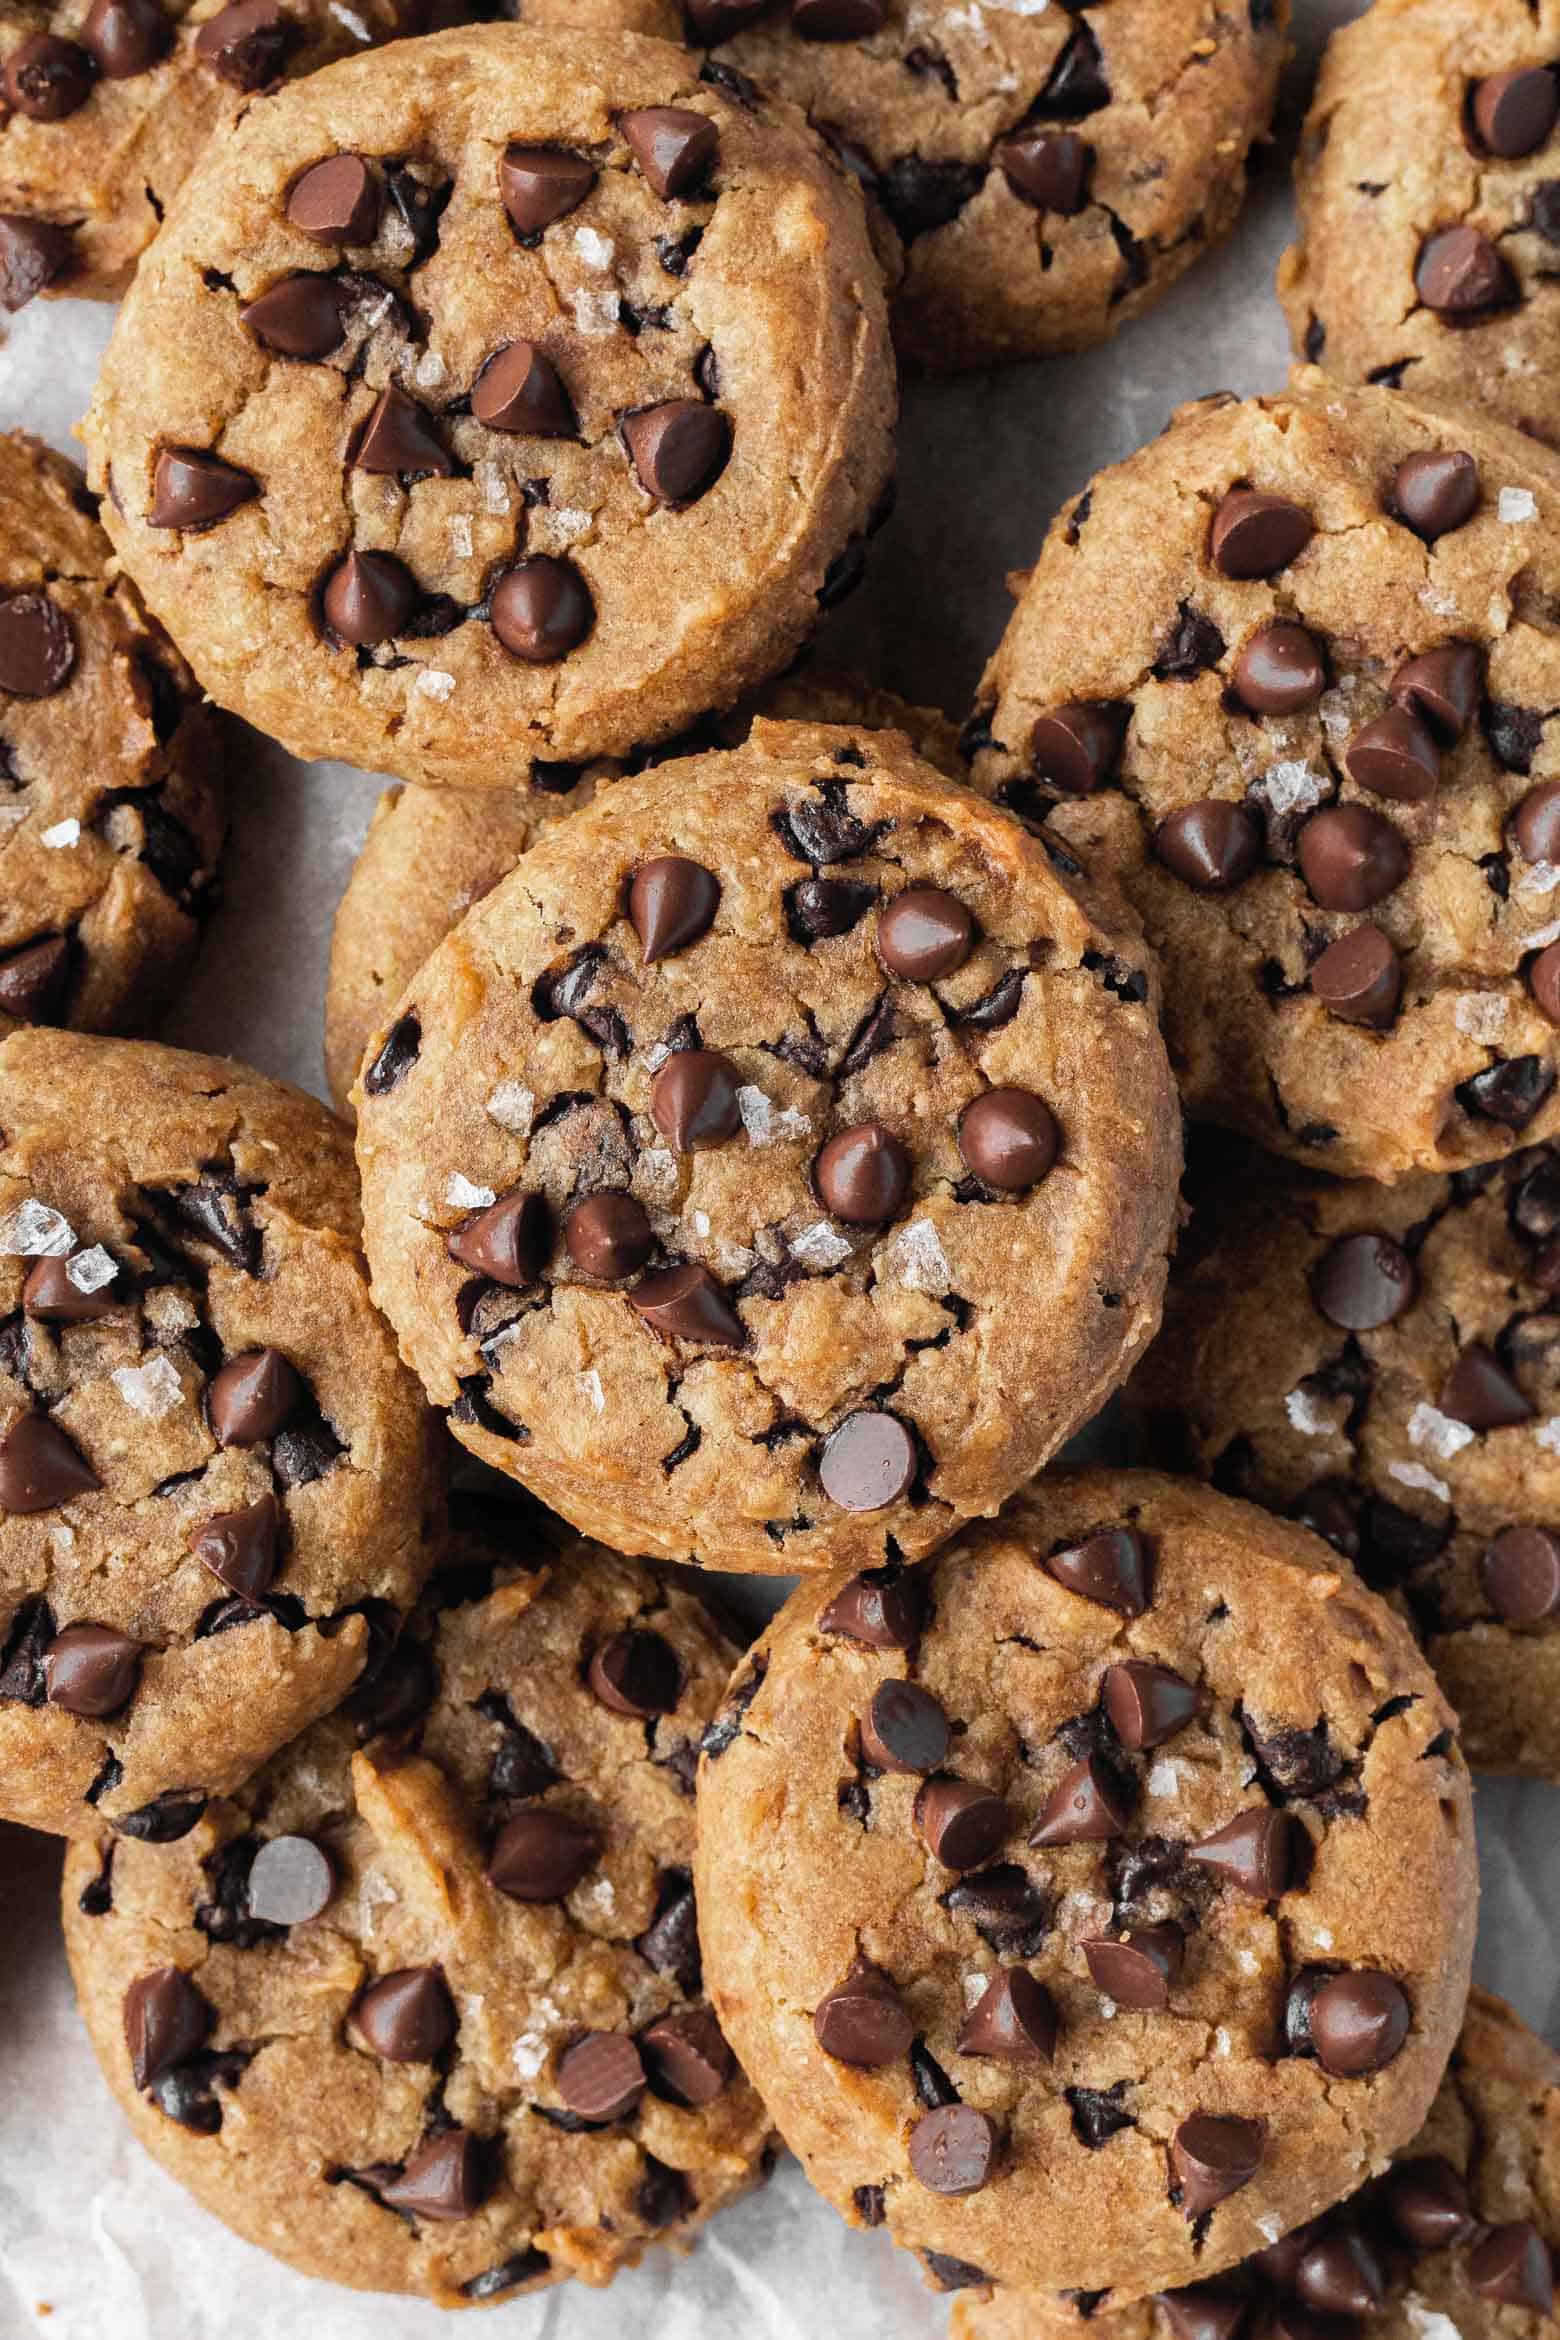 Chocolate chip chickpea cookies